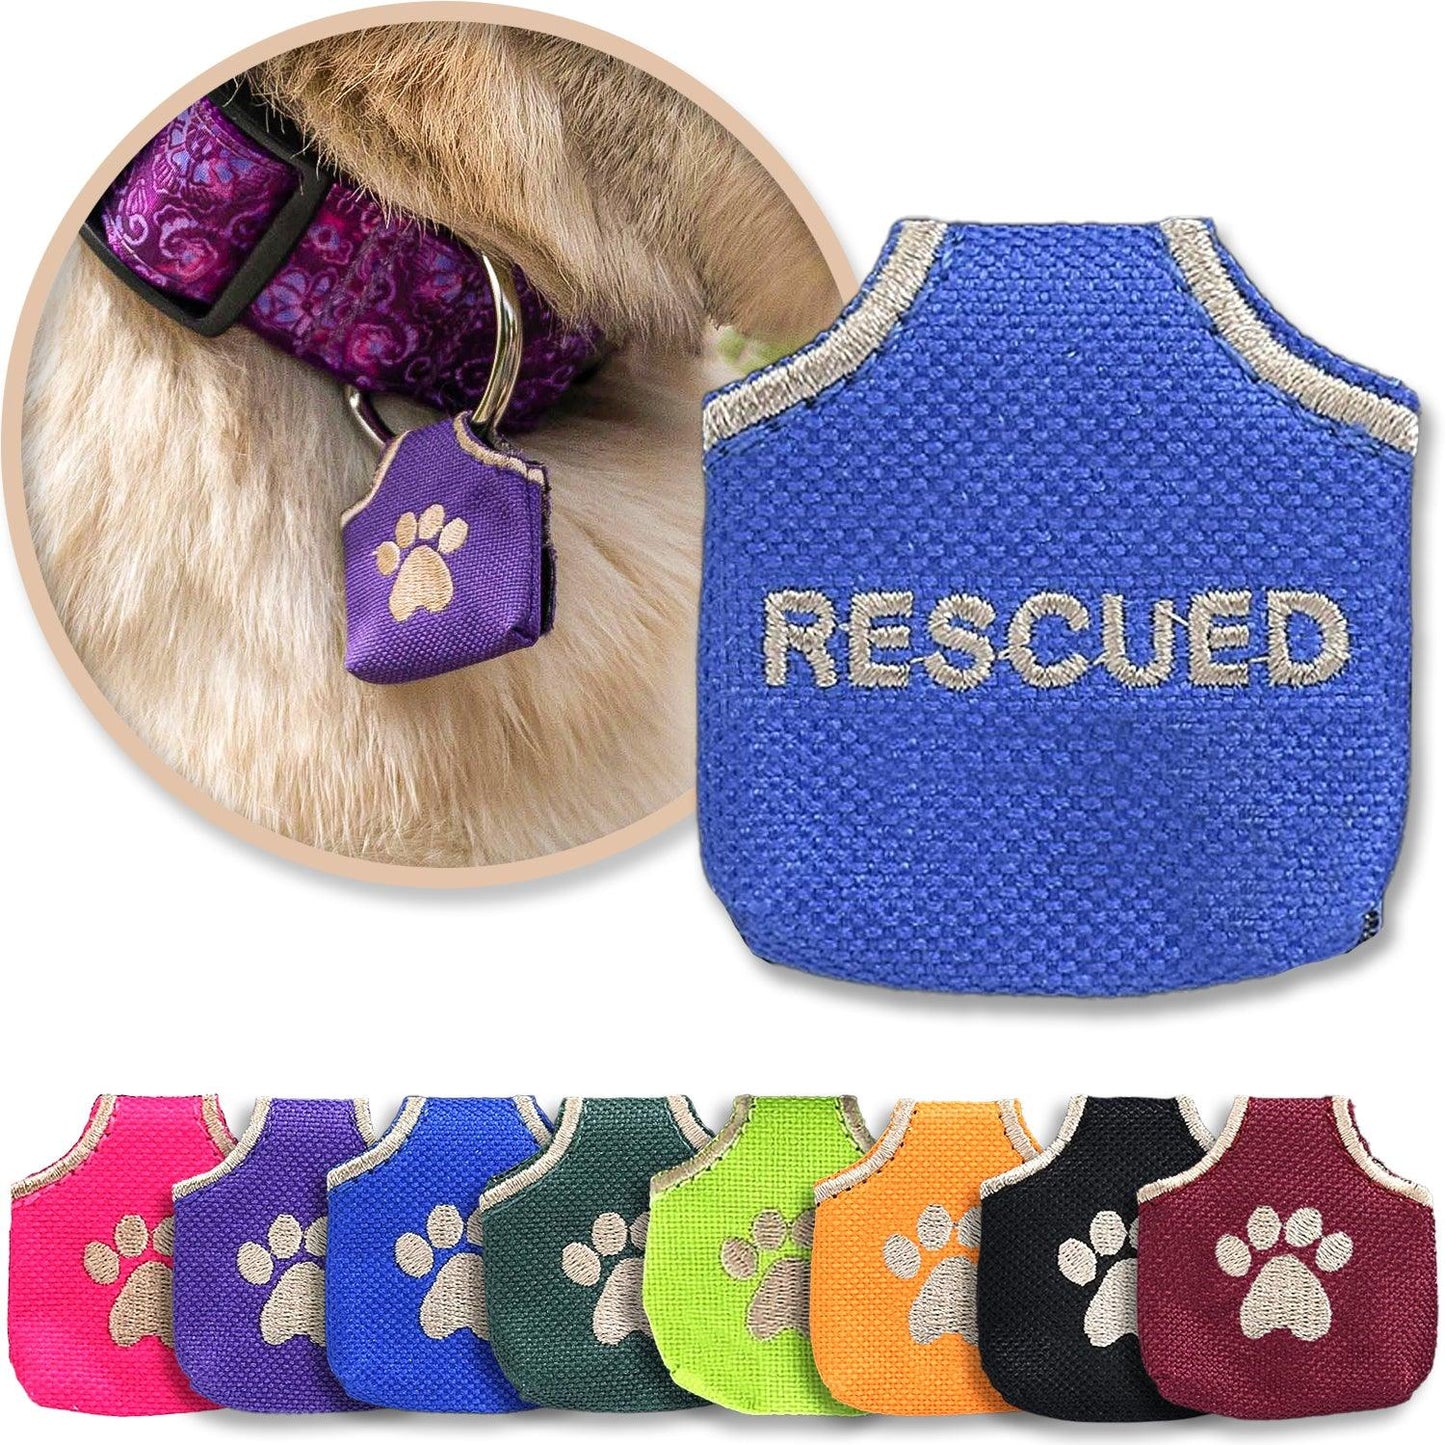 Blue 'rescued' dog tag silencer shown with other colors